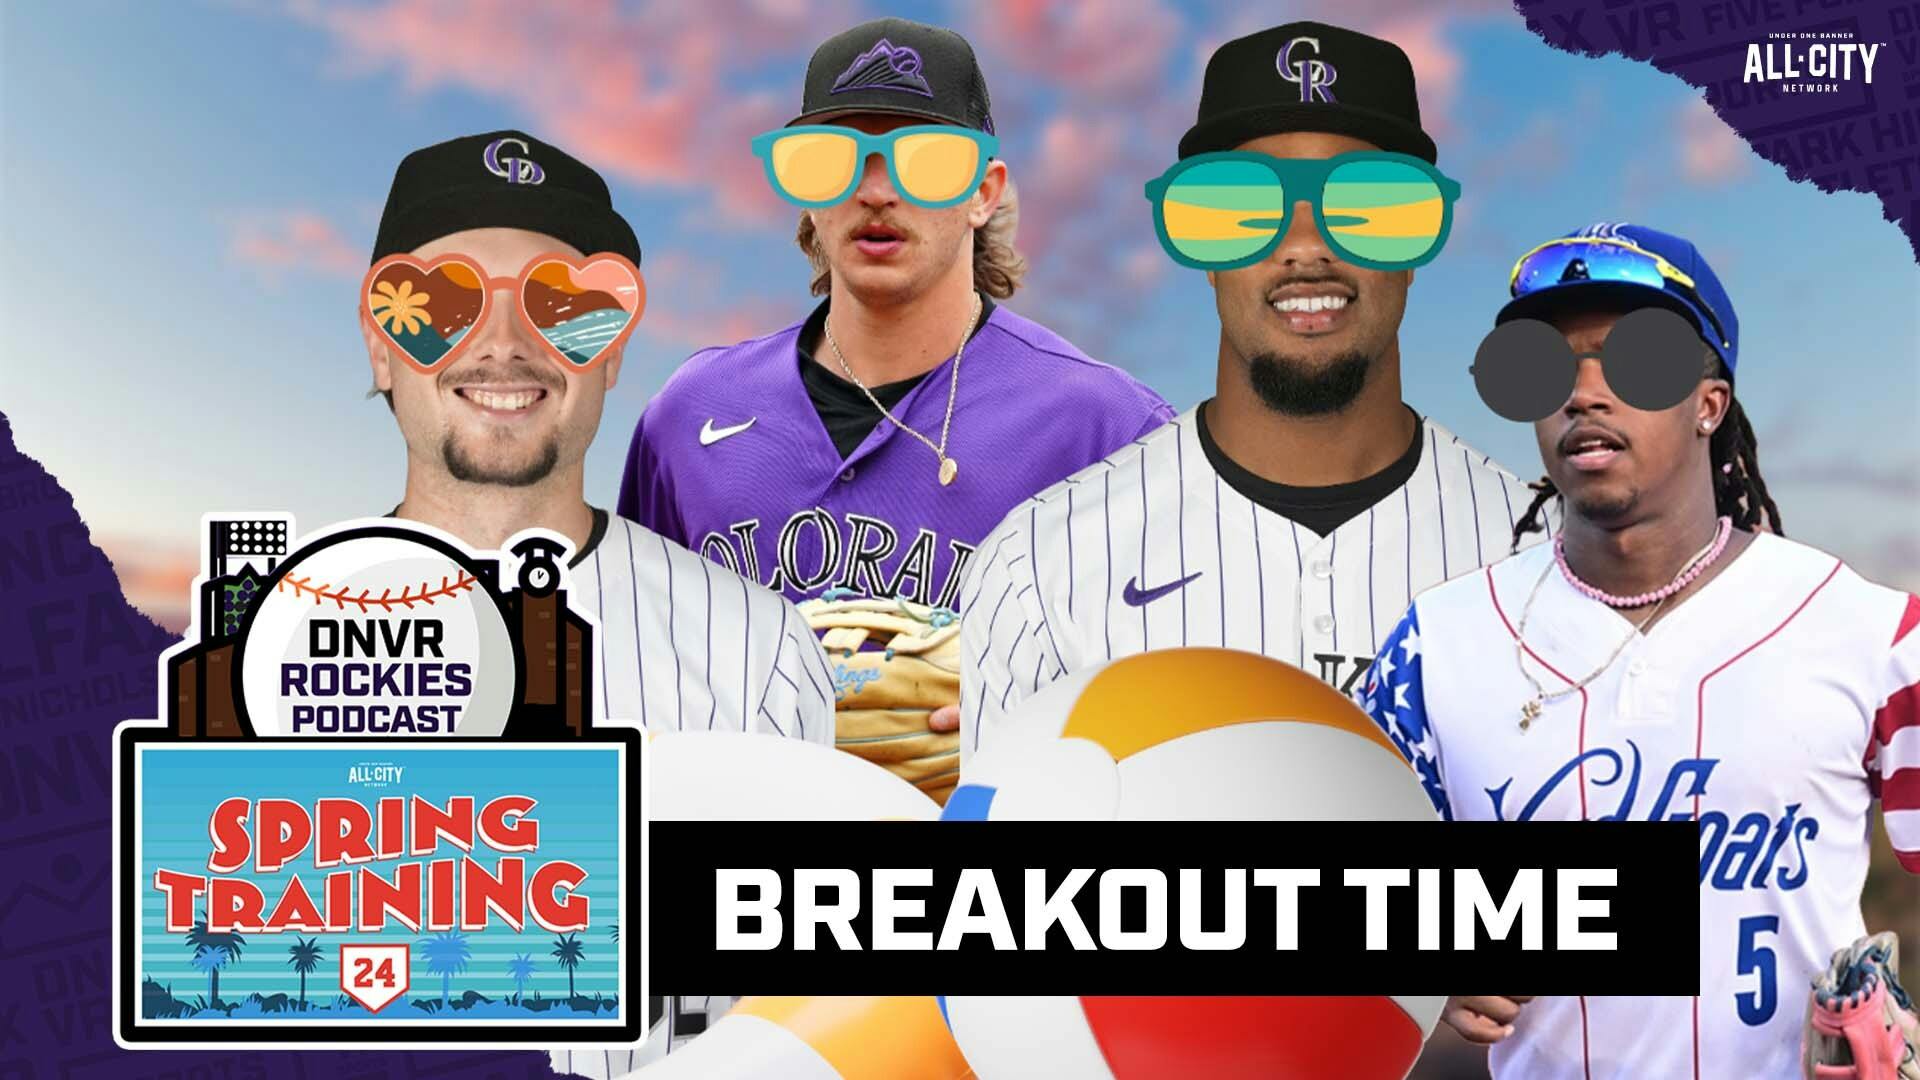 The Rockies are “in a good spot” heading into season; they also have one of the best Spring Breakout rosters | DNVR Rockies Podcast